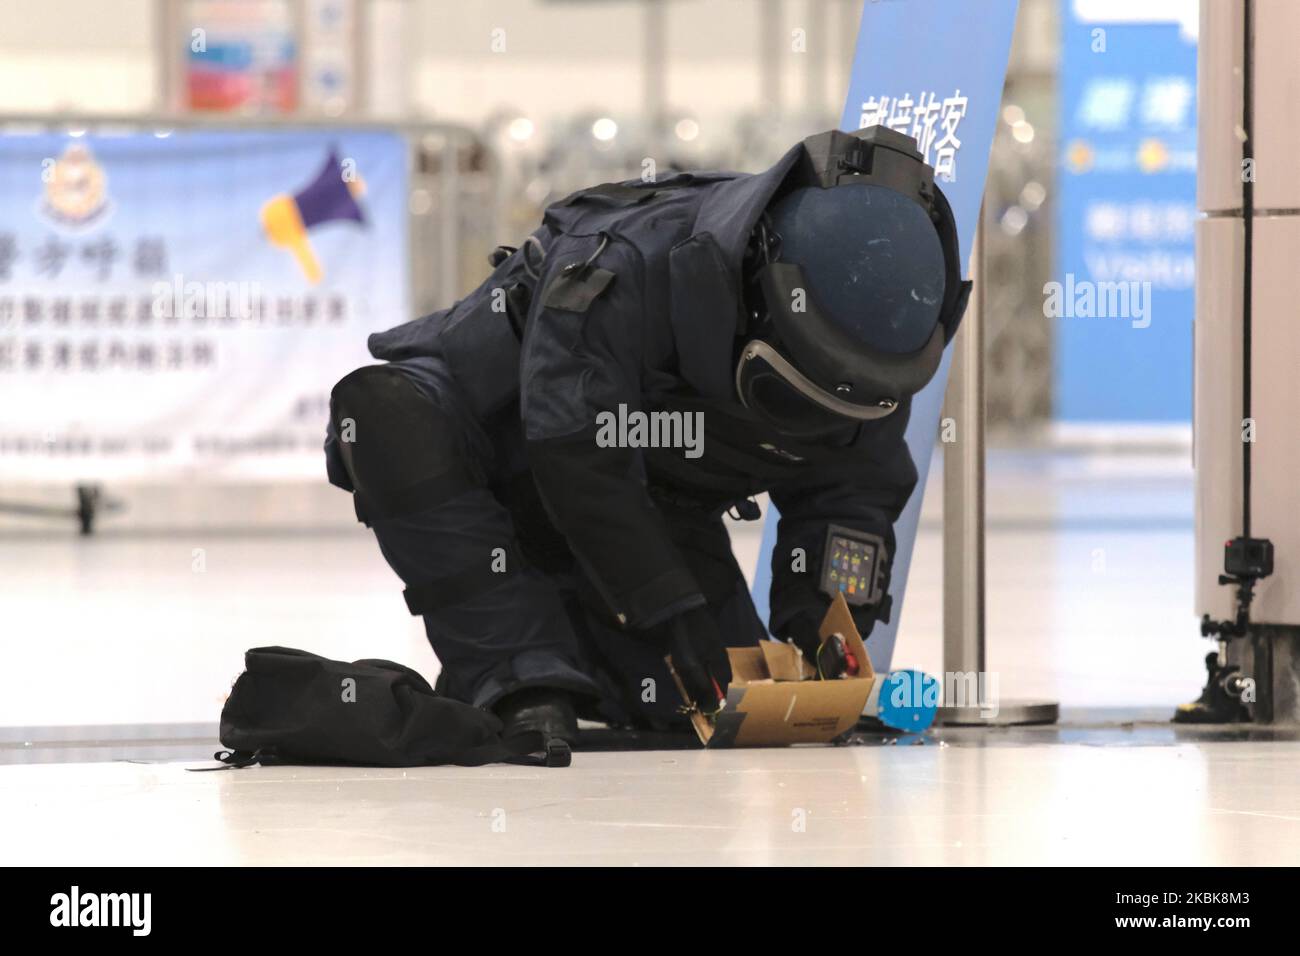 A police officer in Explosive Ordnance Disposal (EOD) suit is seen during an inter-departmental counter-terrorism exercise in Lok Ma Chau Spur Line Control Point on March 20, 2020 in Hong Kong, China. Today Hong Kong Conducted an inter-departmental counter-terrorism exercise, codenamed “CATCHMOUNT” at Lok Ma Chau Spur Line Control Point . (Photo by Vernon Yuen/NurPhoto) Stock Photo